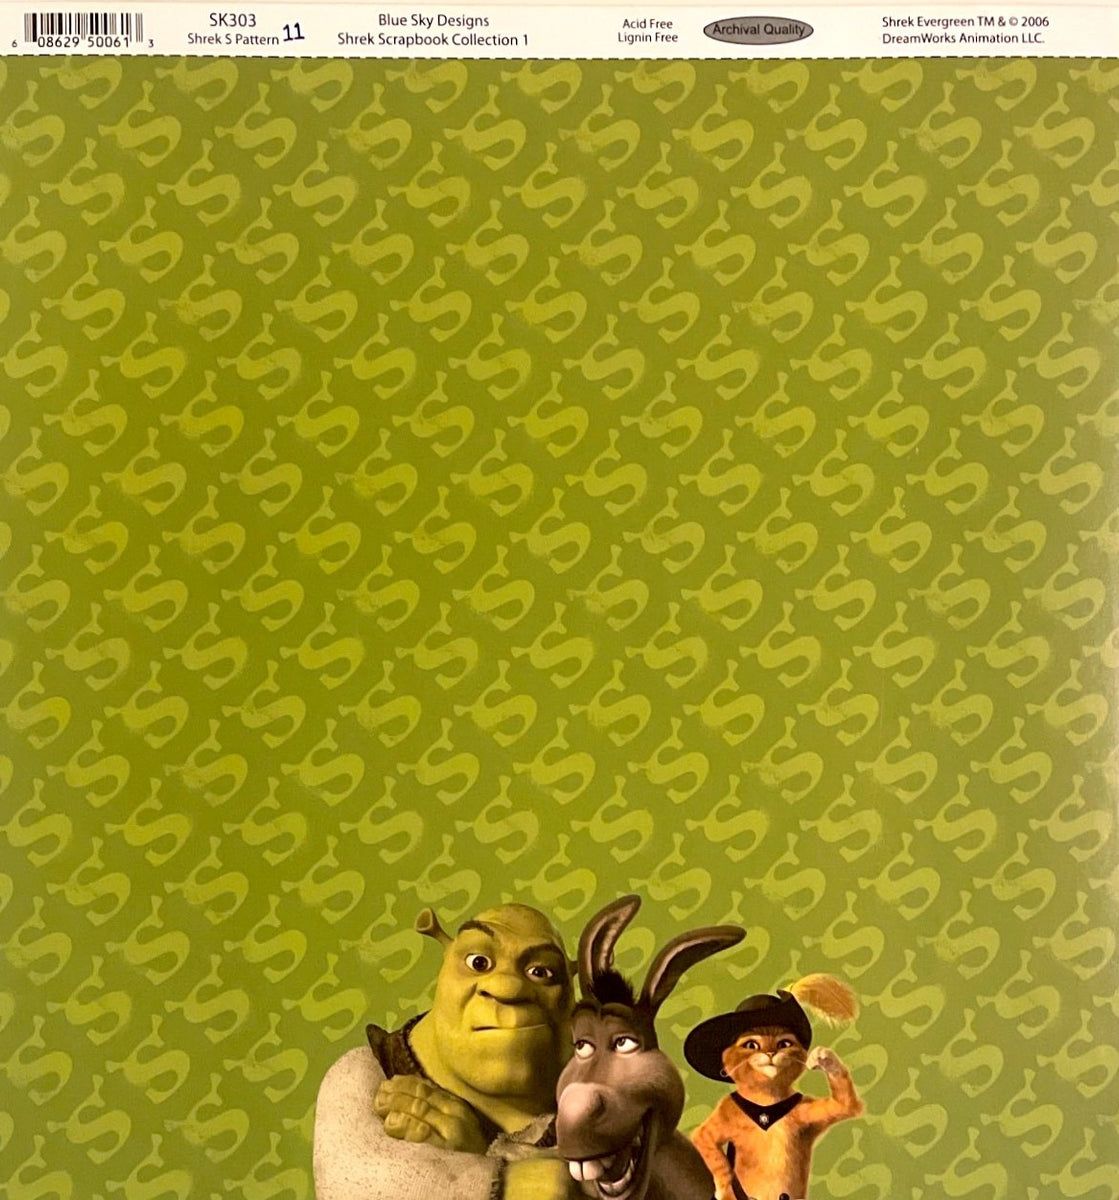 A green patterned paper with Shrek and friends on it. - Shrek